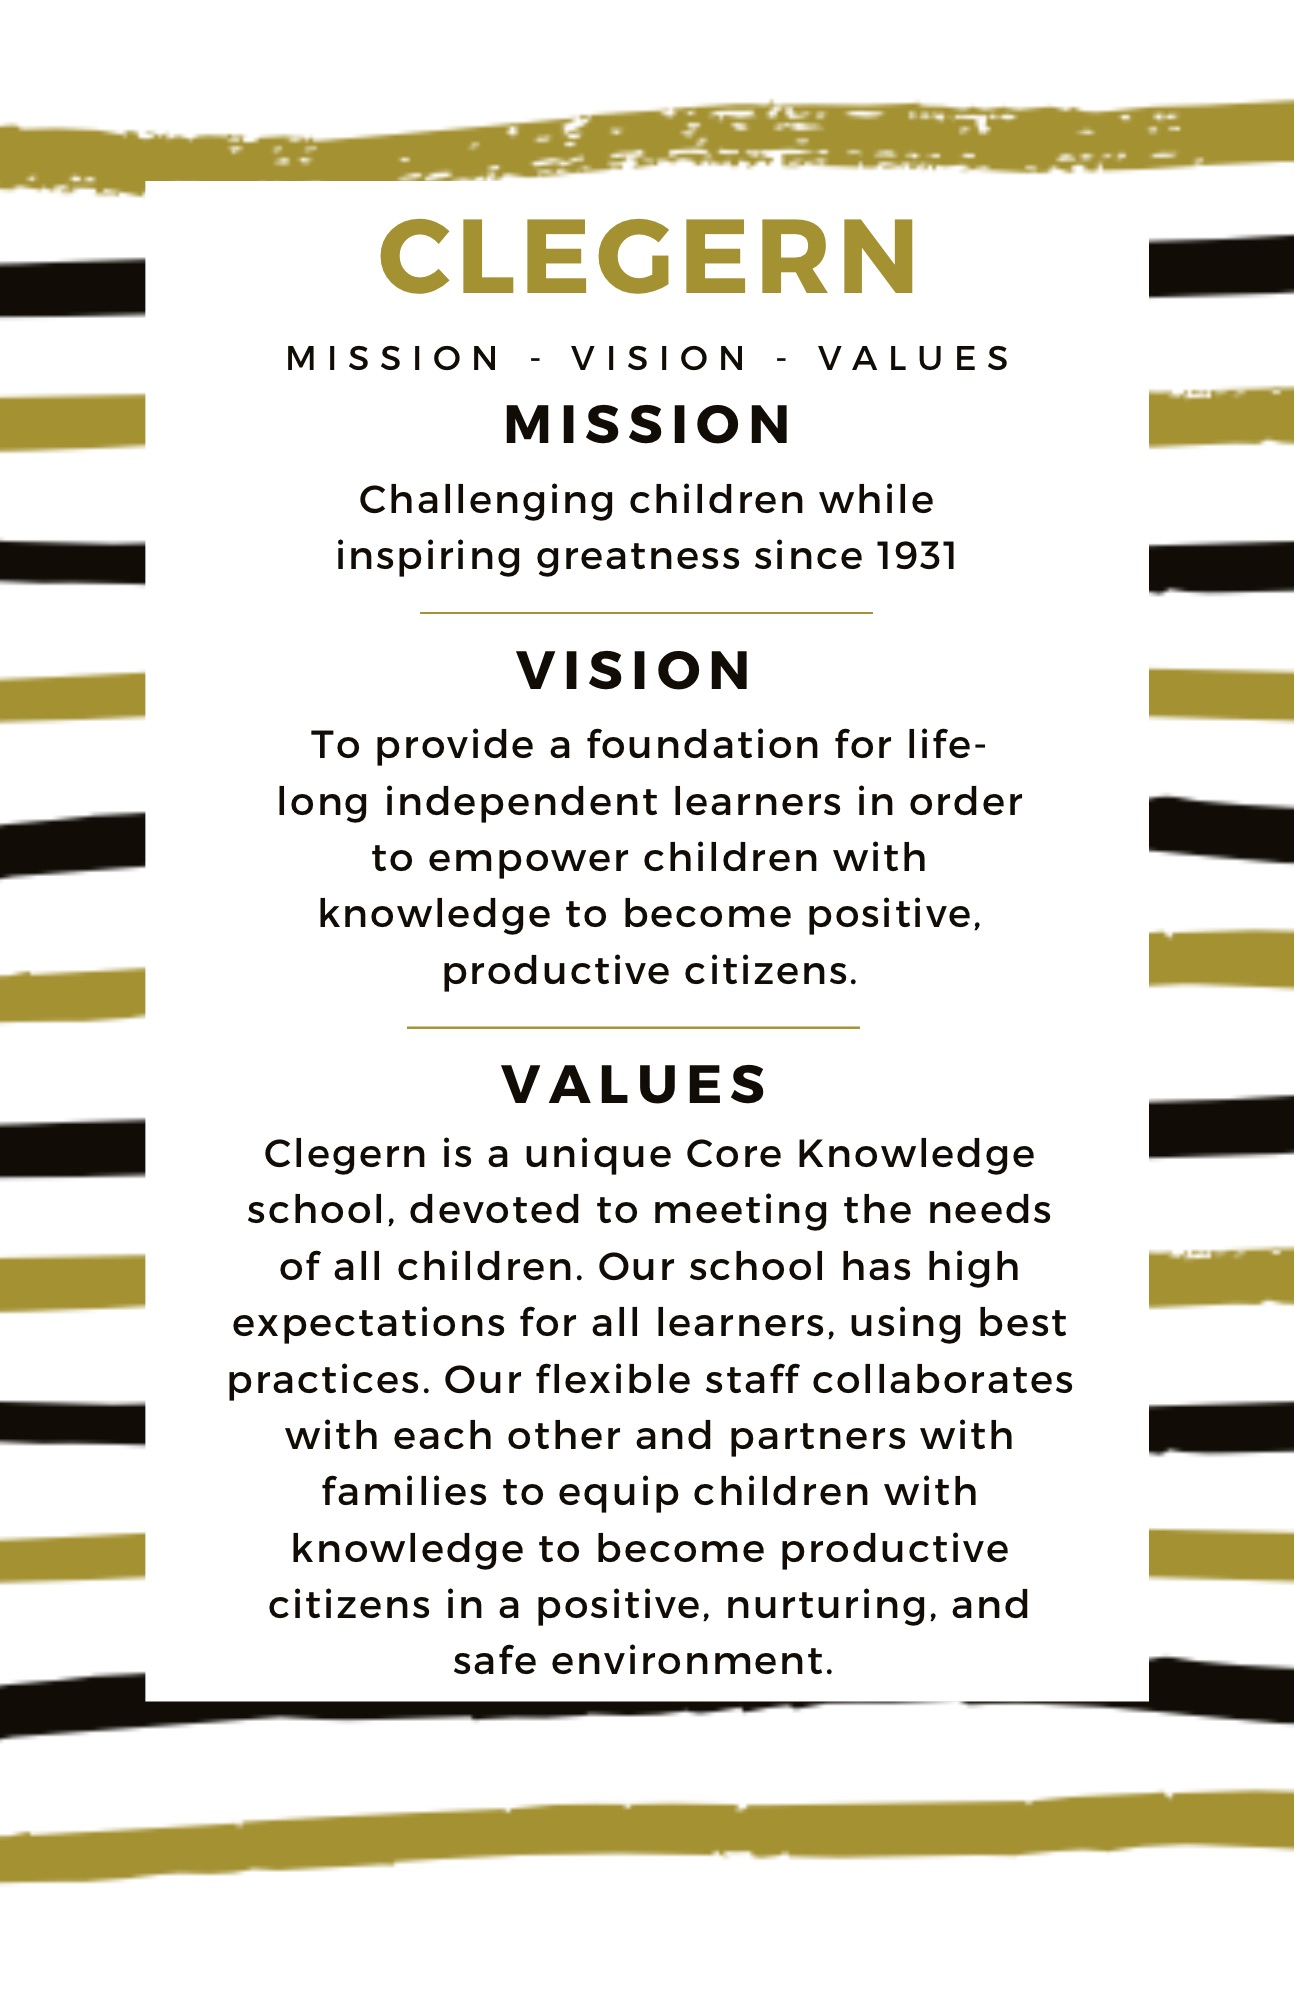 Poster of Clegern's Mission, Vision, and Value Statements